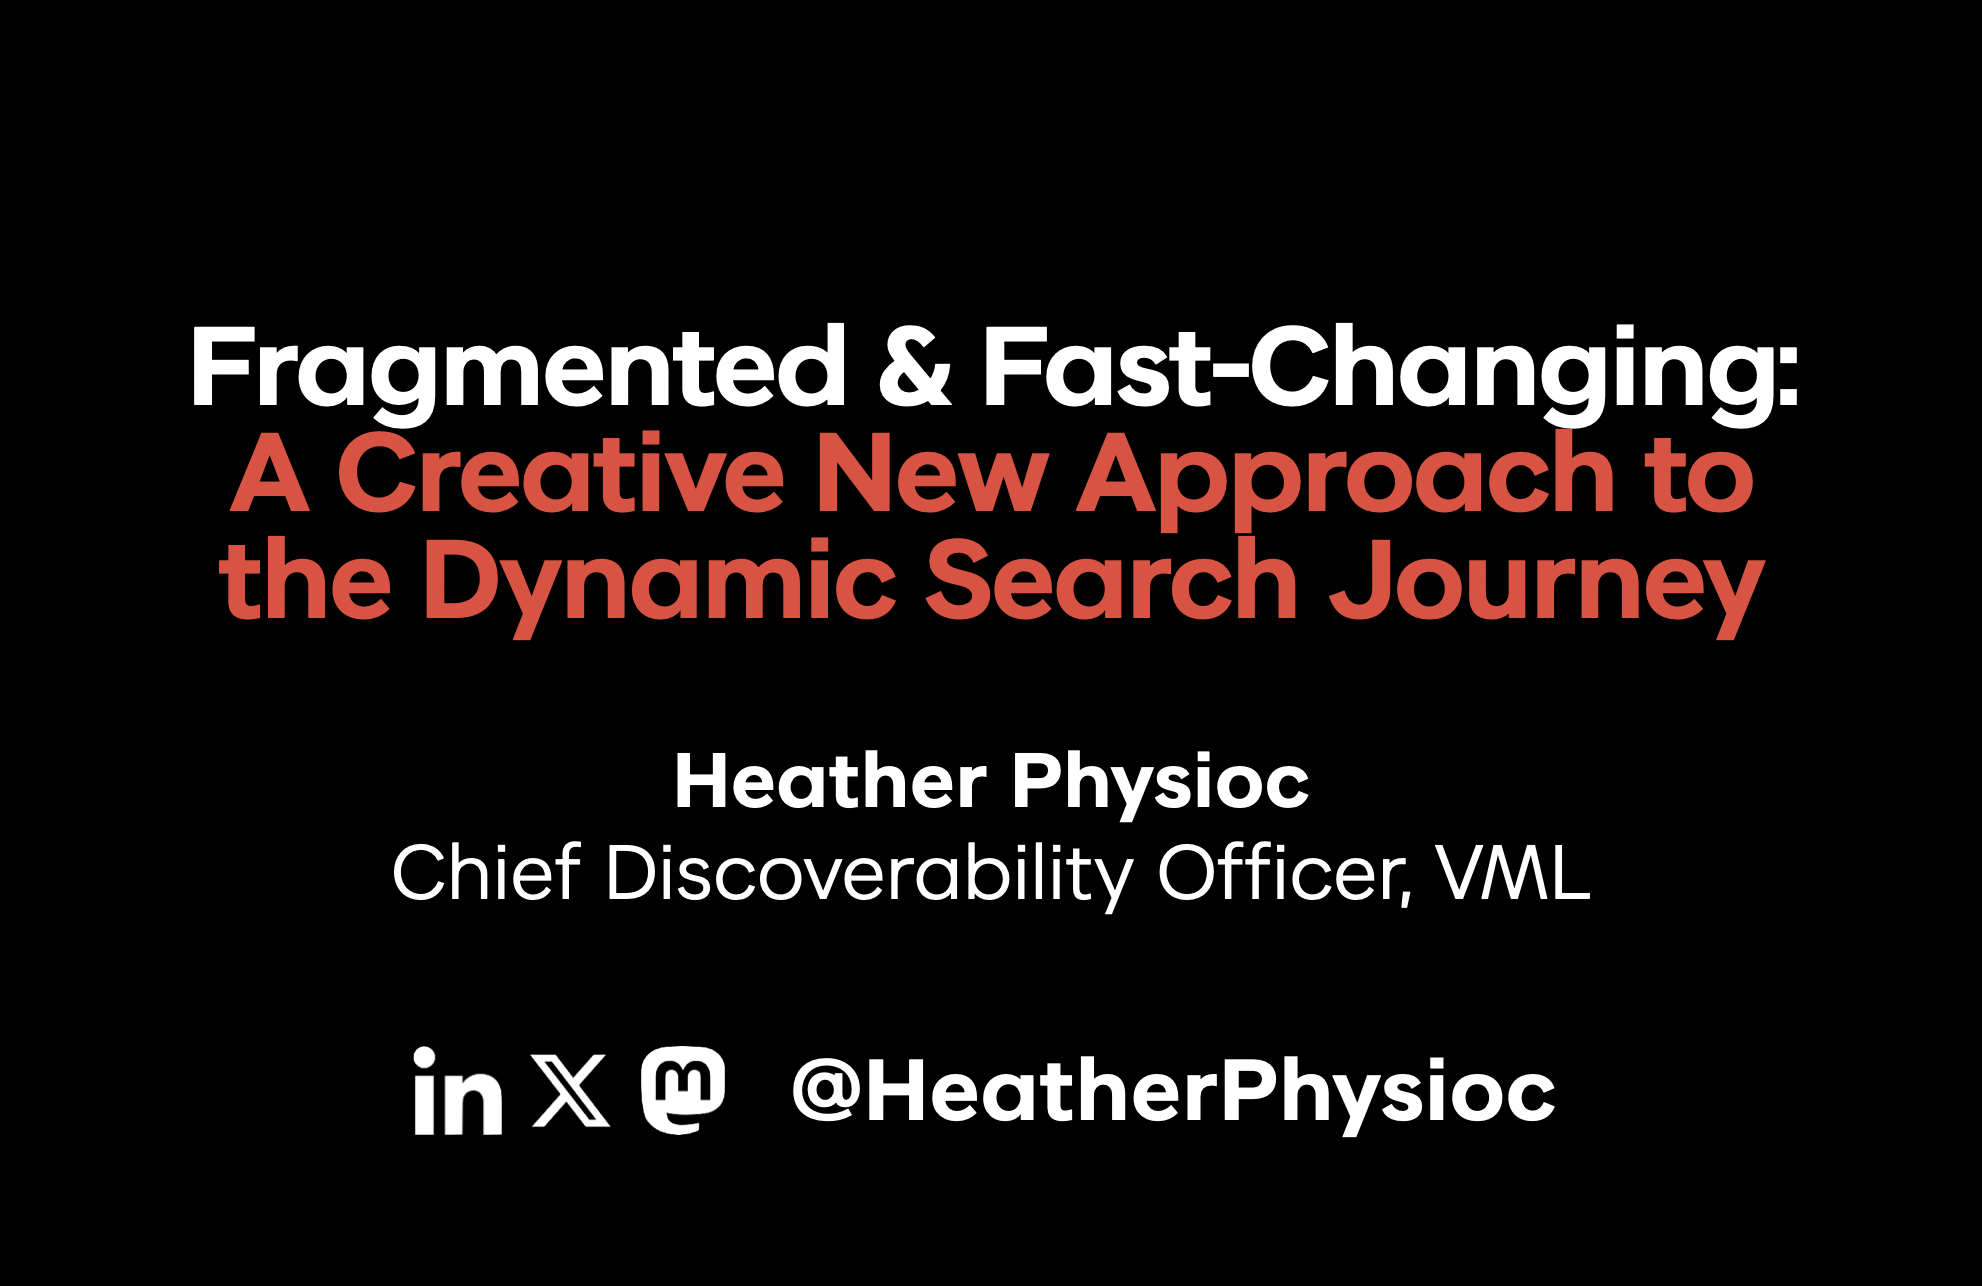 Marketing Keynote: A Creative New Approach to the Dynamic Search Journey